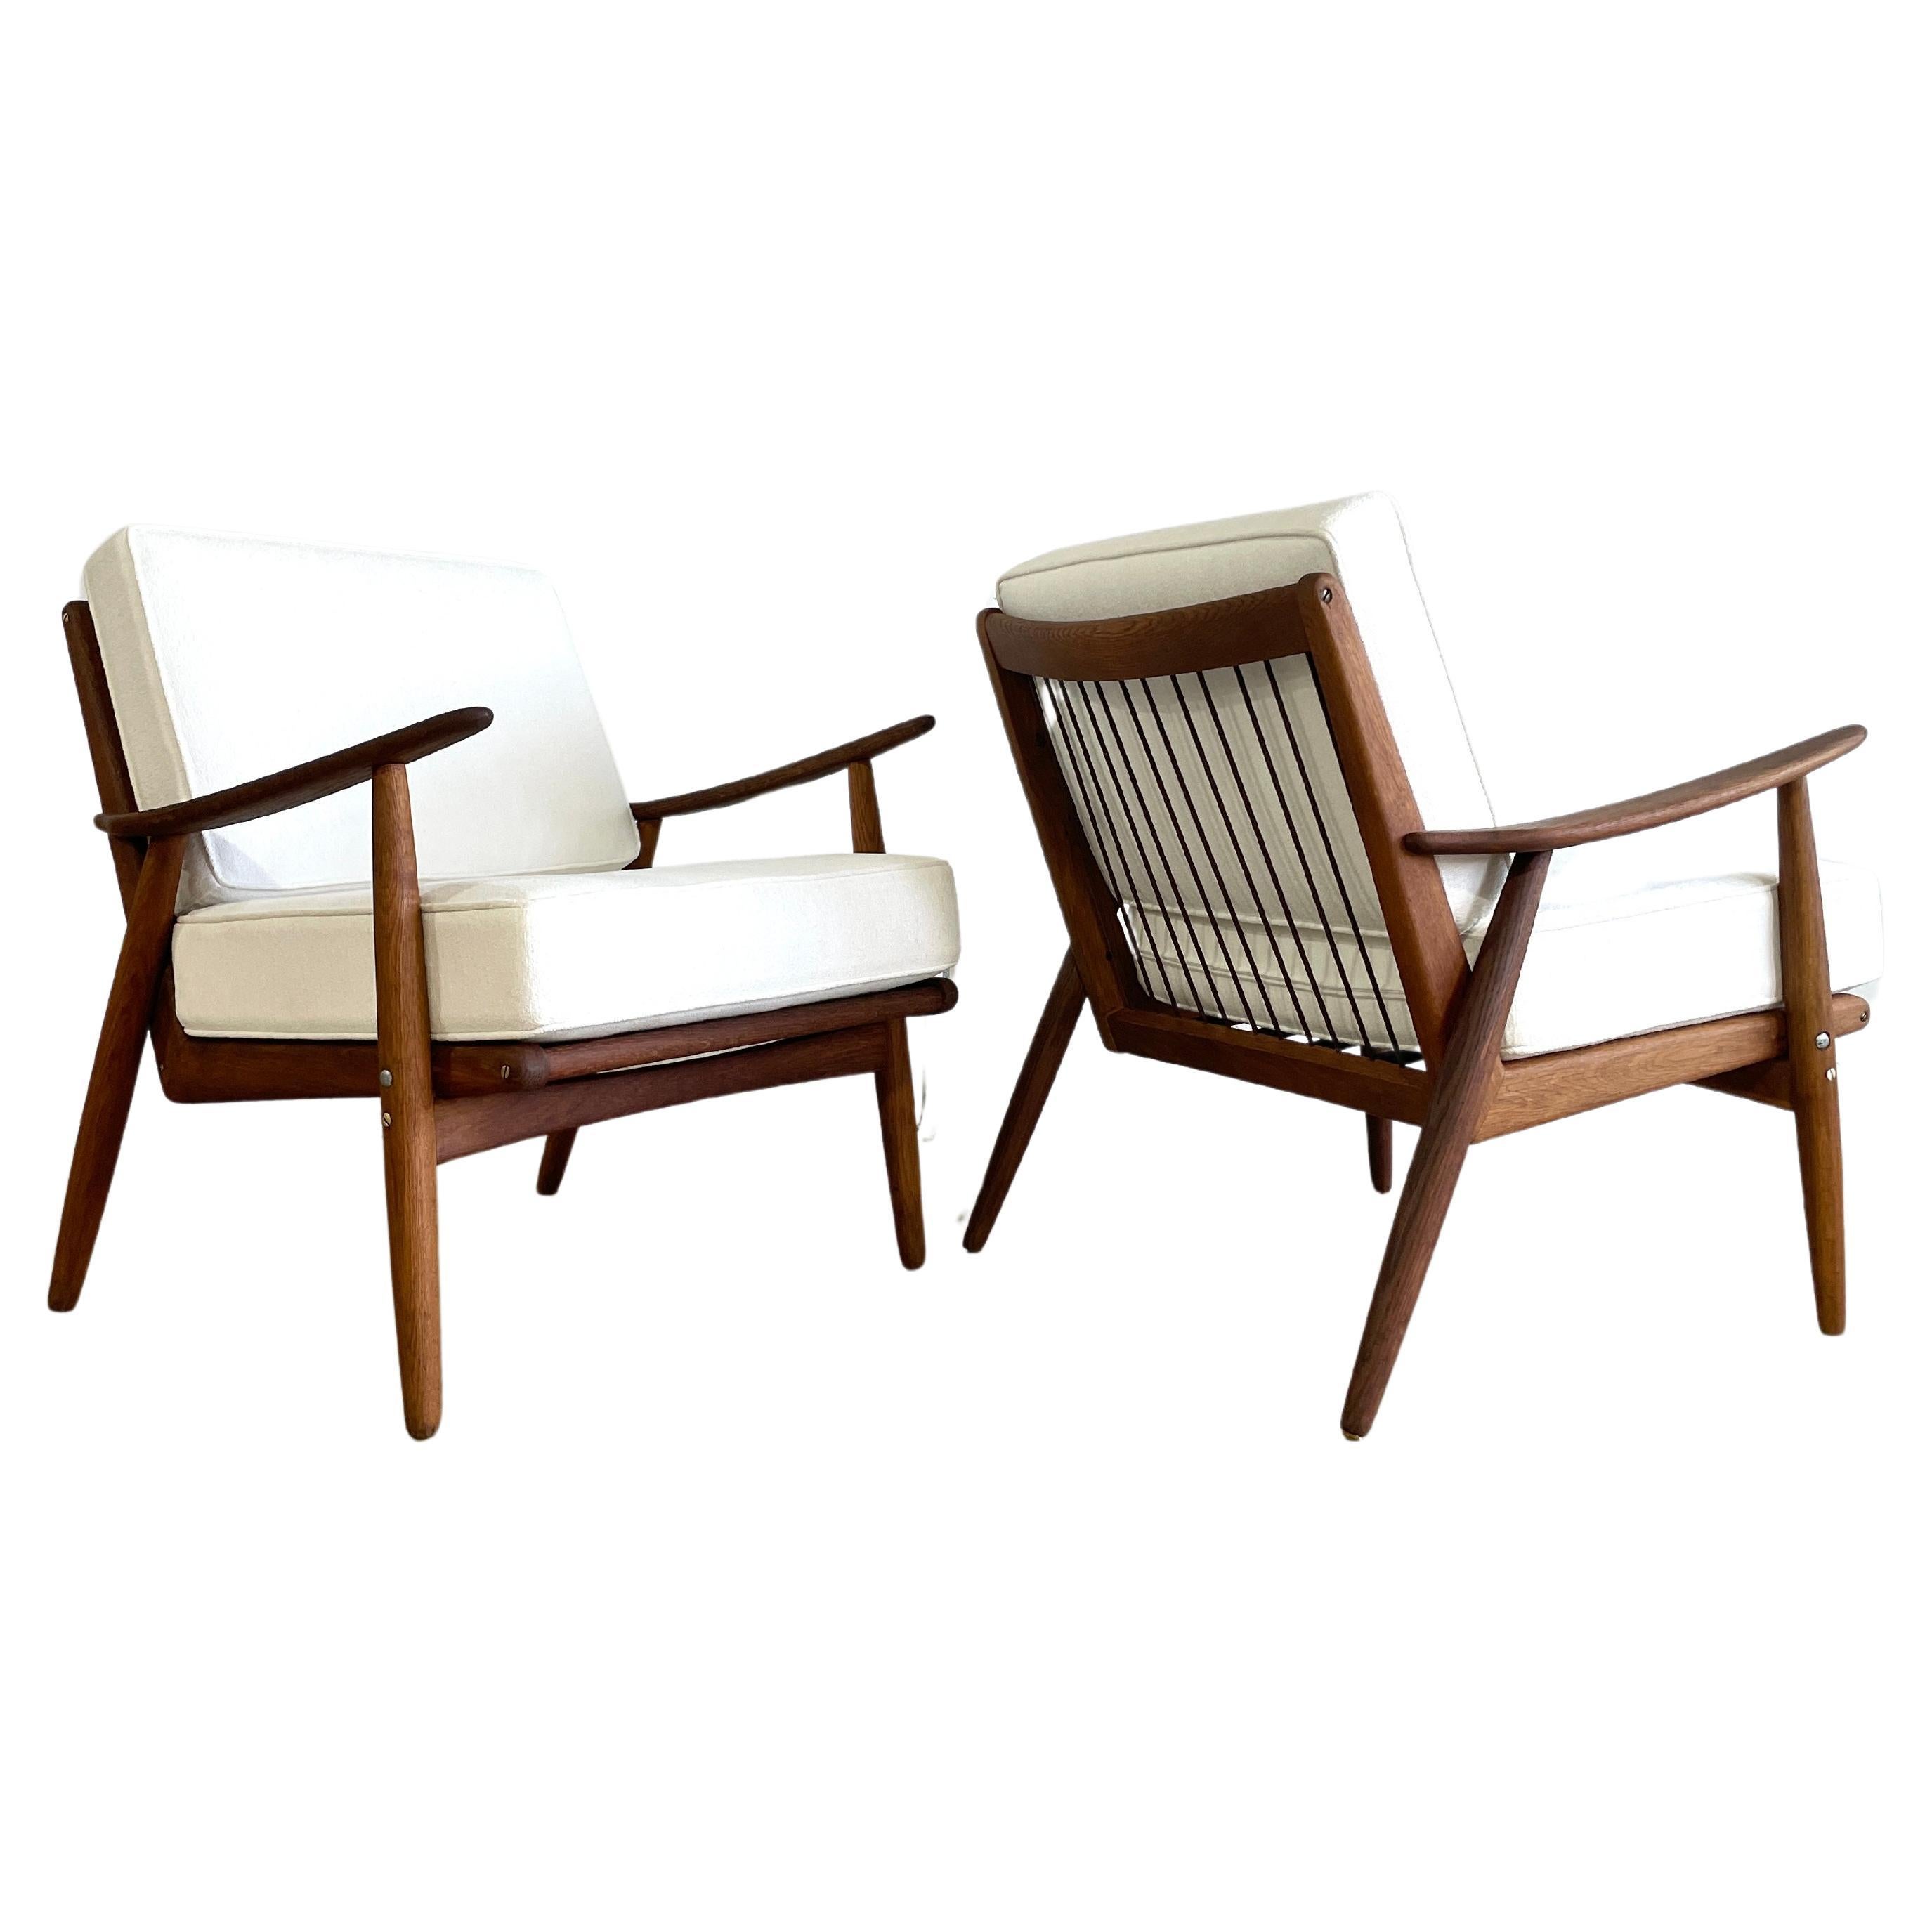 Mid Century Danish Modern Lounge Arm Chairs - a Pair For Sale